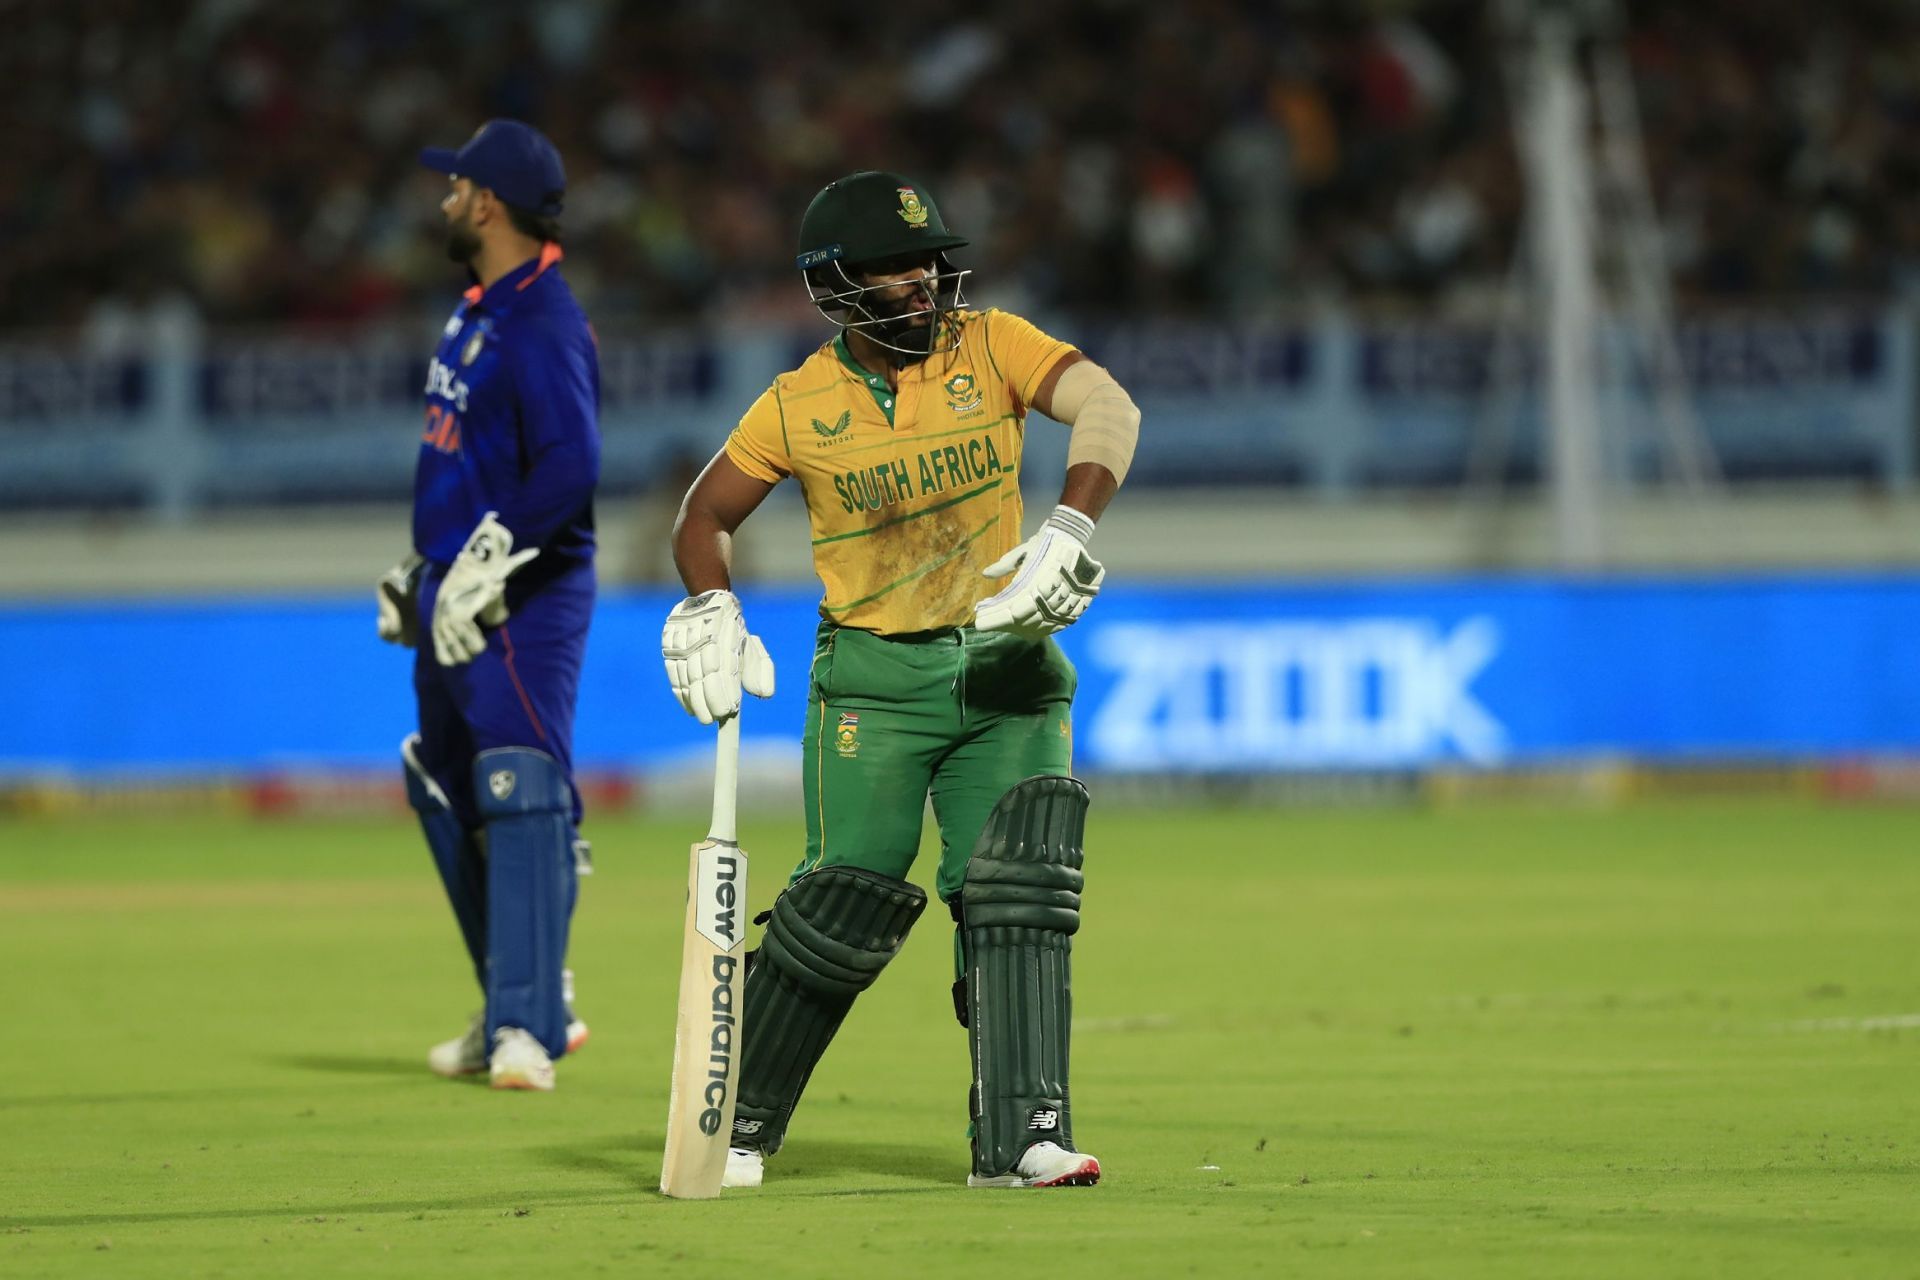 Temba Bavuma perished for single-digit scores in all three T20s against India. (Credits: Getty)